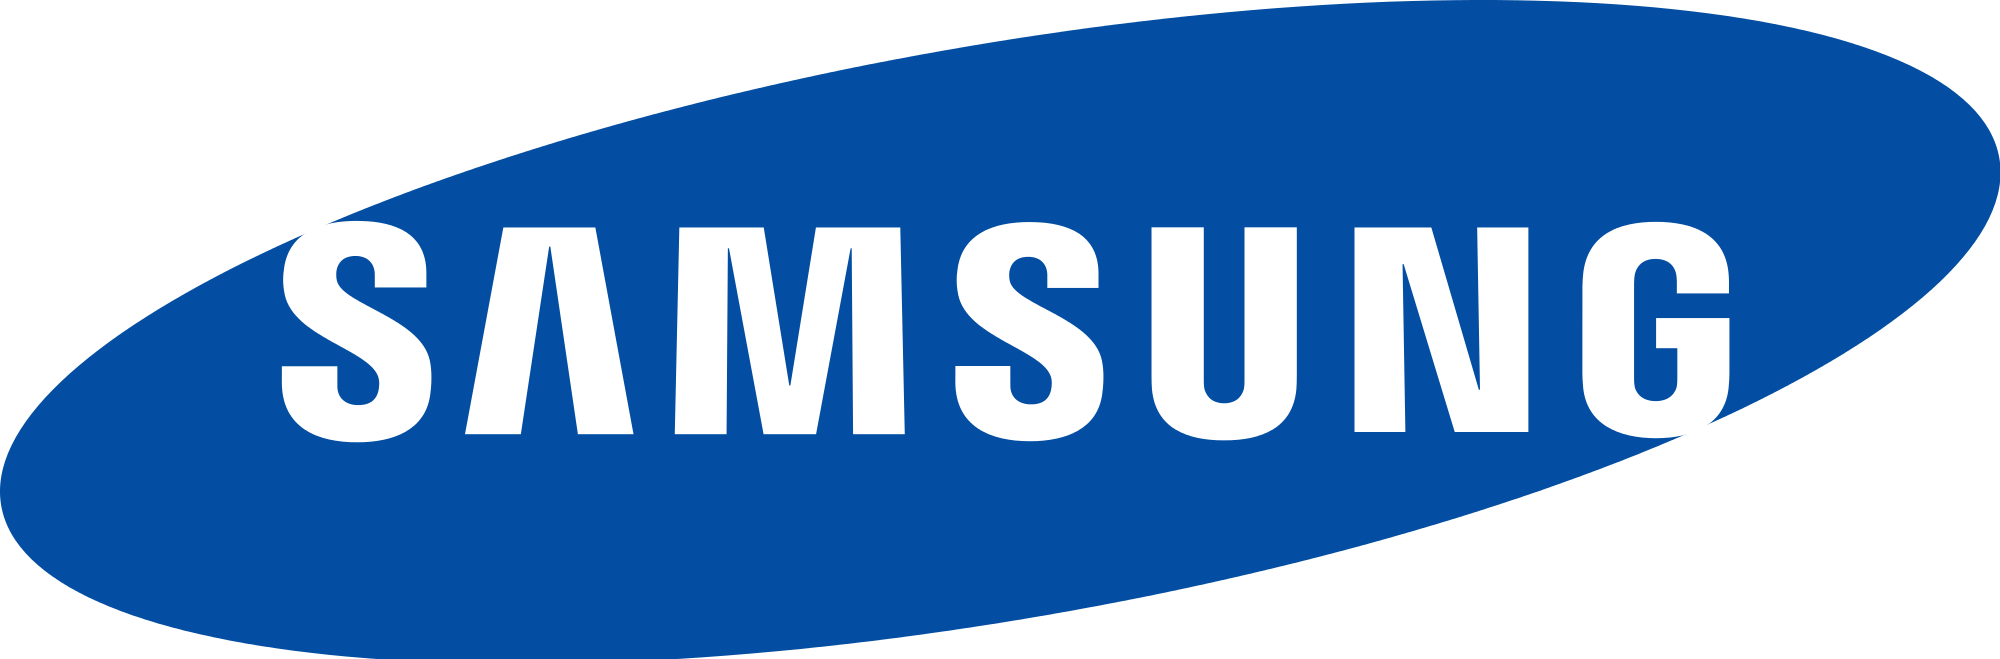 Samsung is the most trusted brand in Asia - sixth year in a row